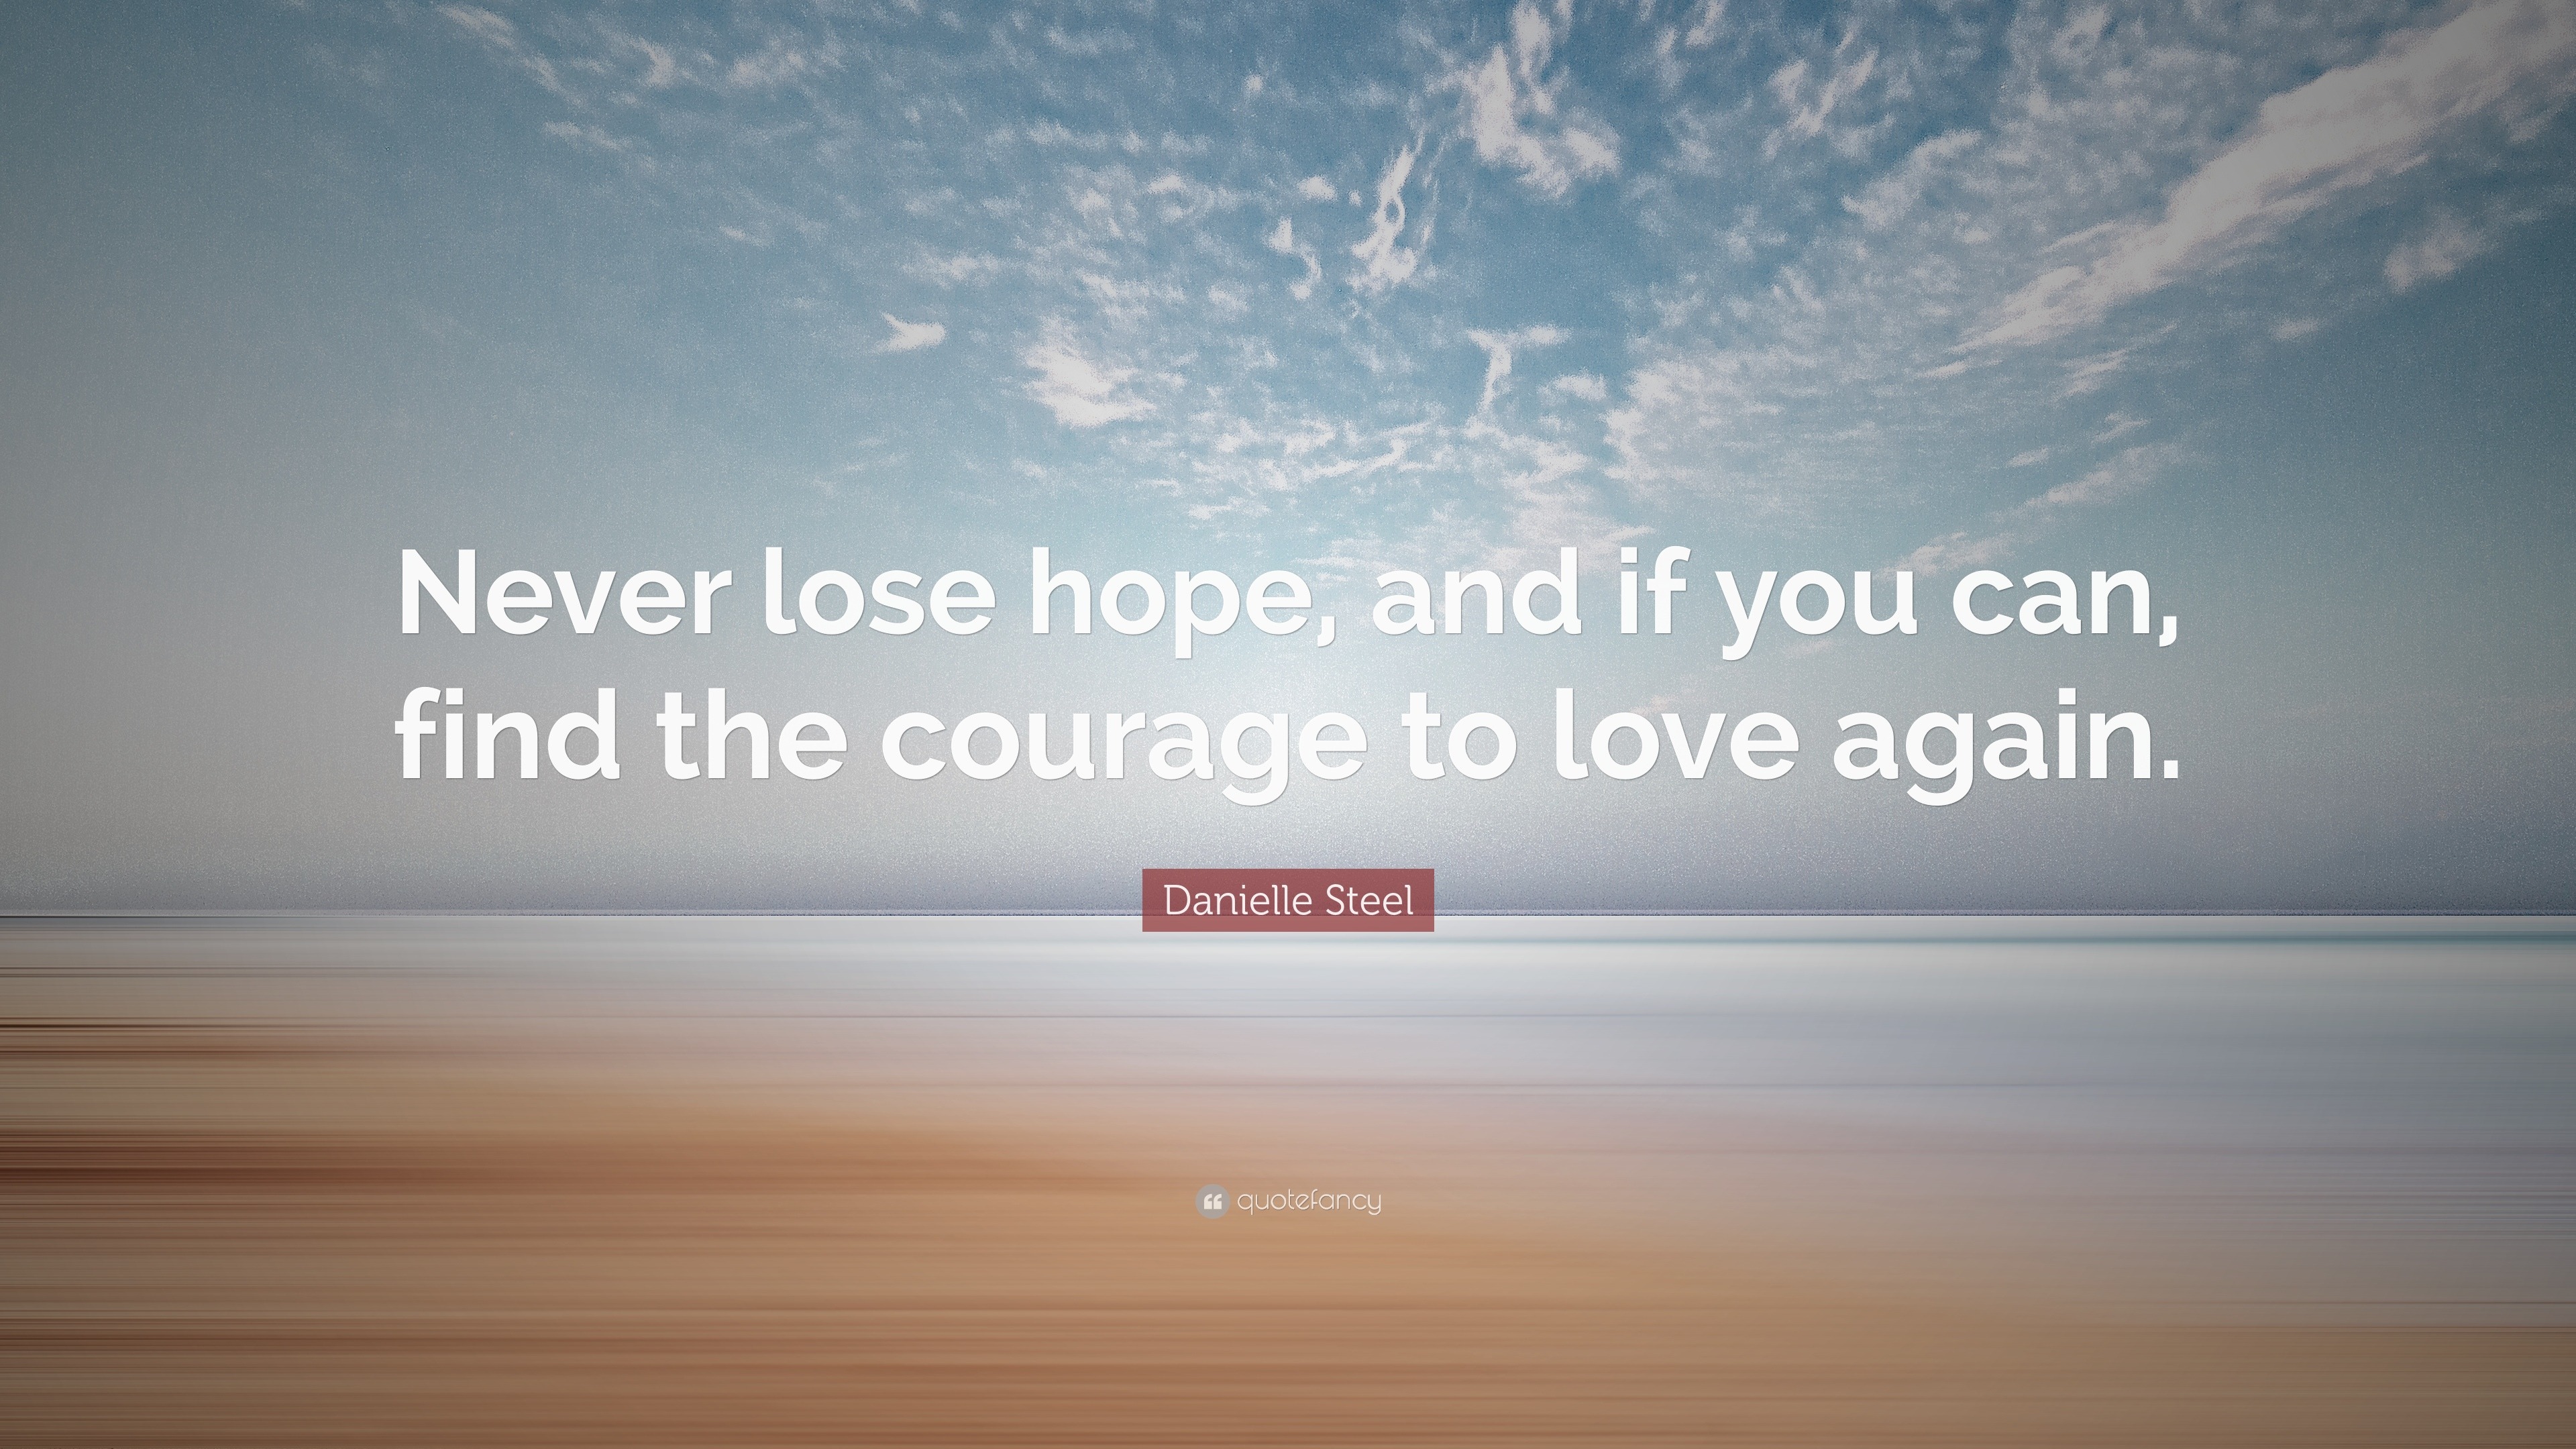 Danielle Steel Quote “Never lose hope and if you can find the